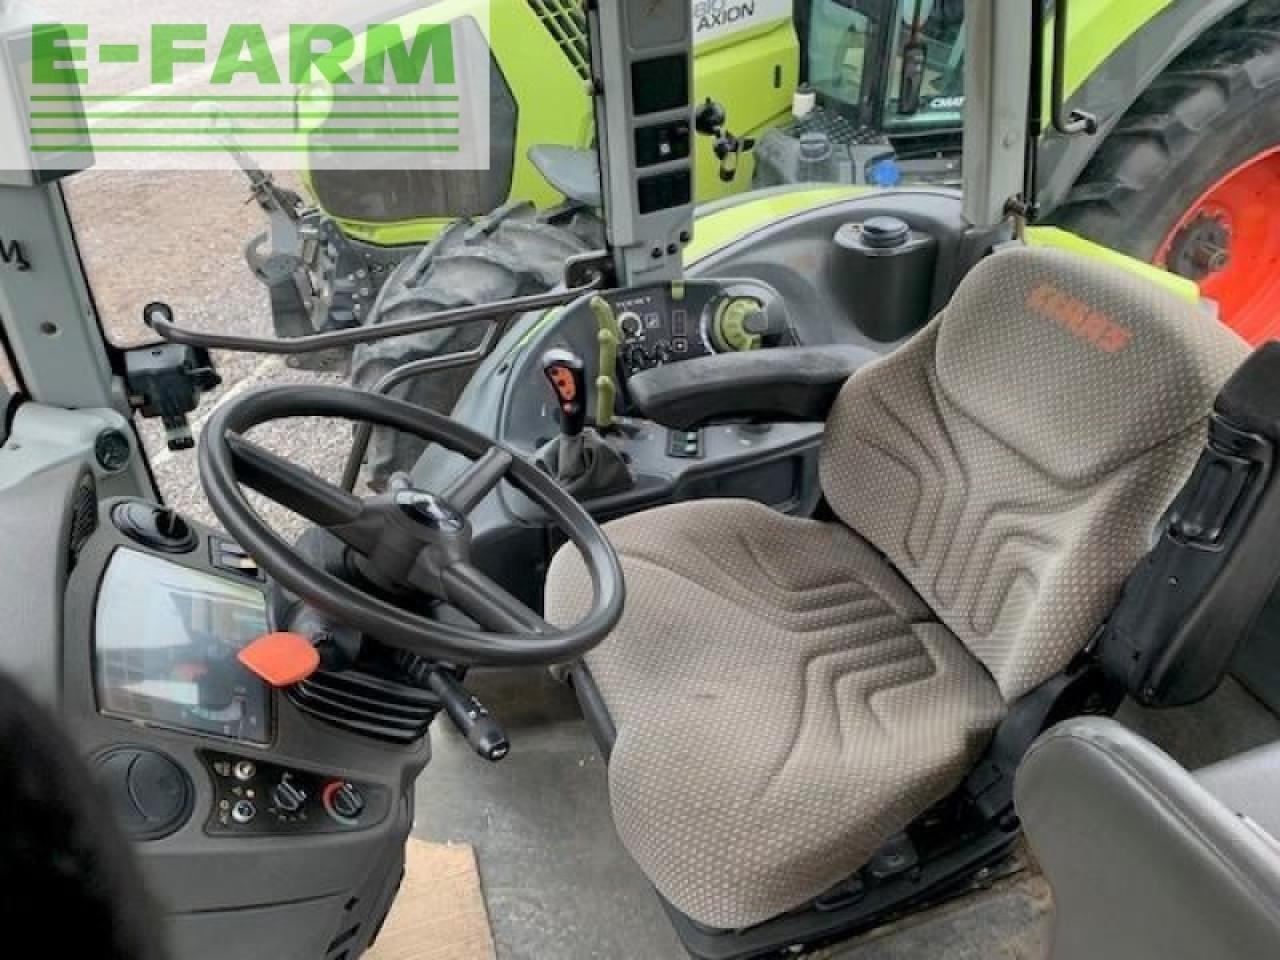 Tracteur agricole CLAAS ares 697 atz